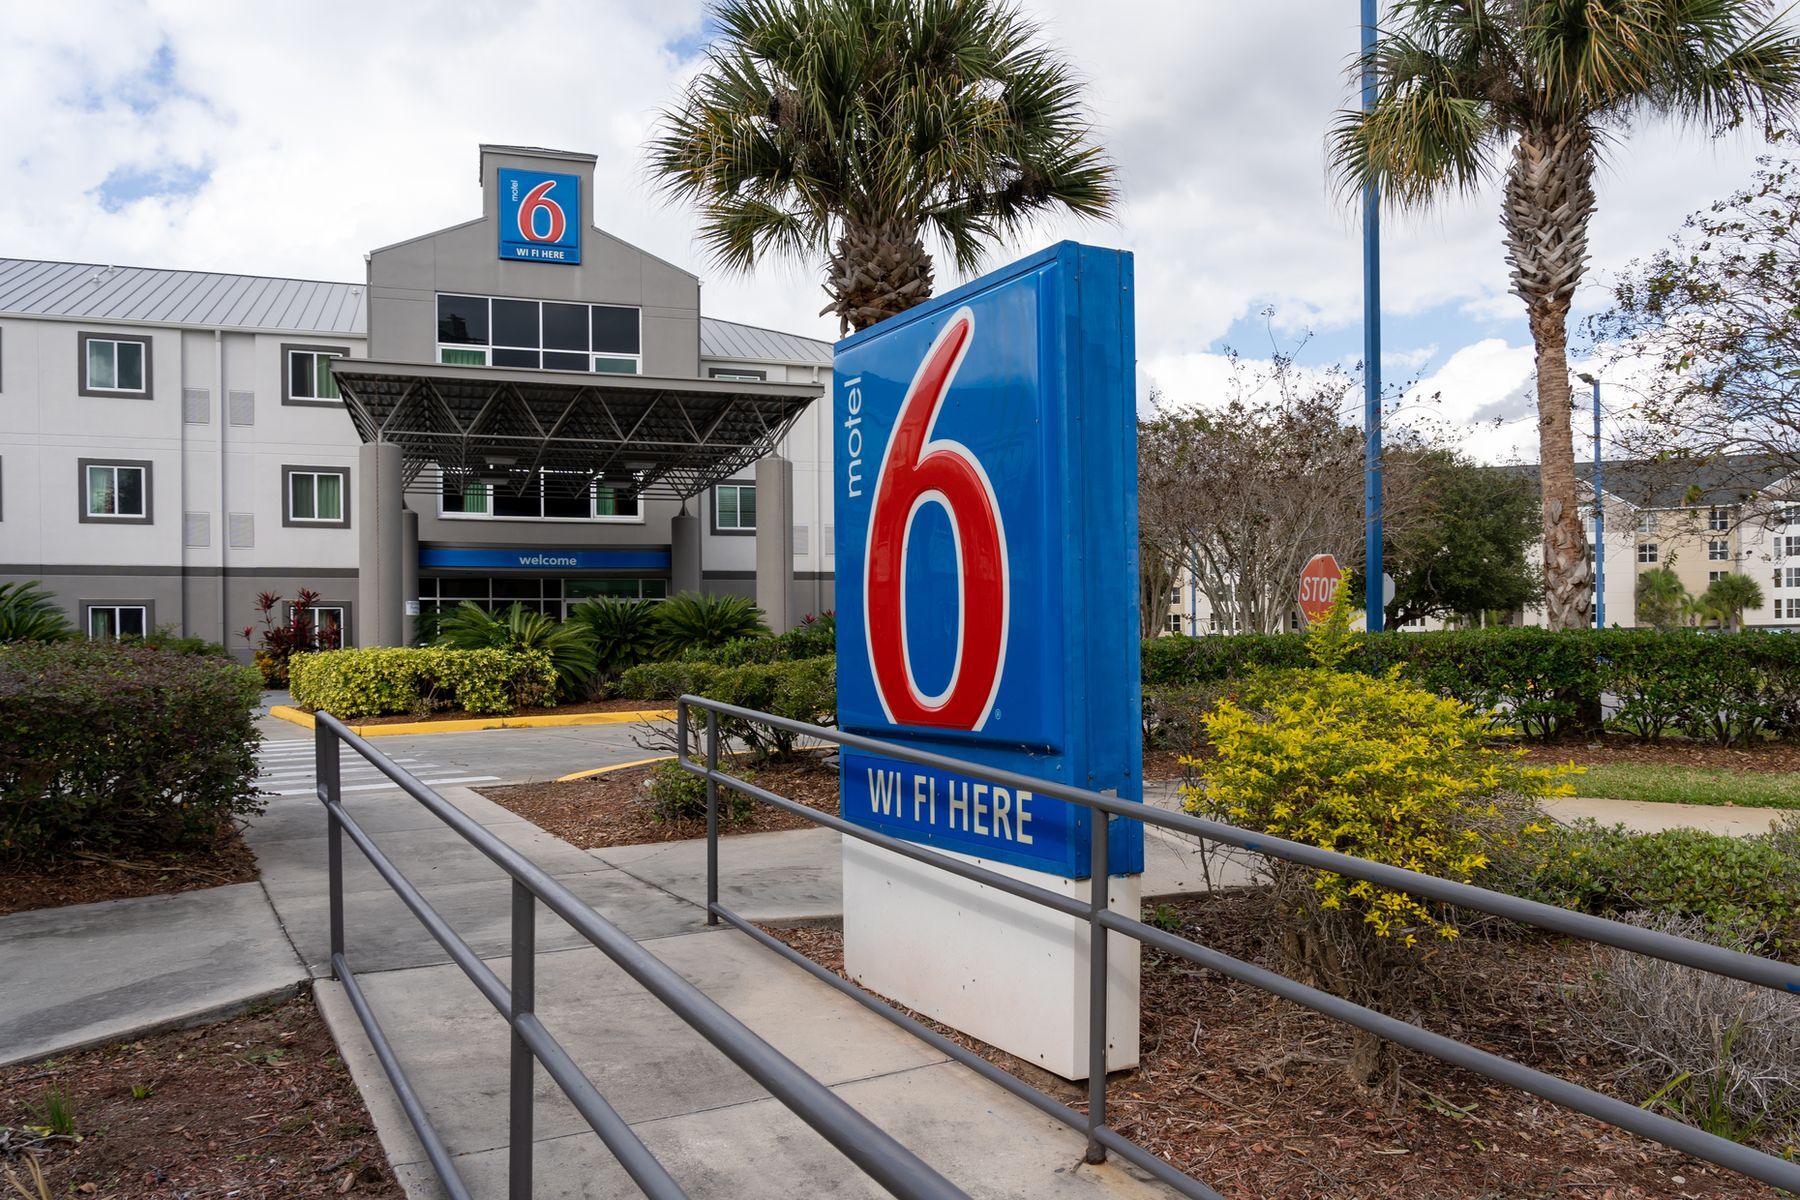 <p>Operating exclusively in the United States and Canada, Motel 6 is a chain of budget motels, typically meant for short-term stays. Much like Super 8, the name comes from the <a href="https://robertkaplinsky.com/work/motel-6/#:~:text=When%20Motel%206%20opened%20for,prices%20have%20continued%20to%20grow.">price of the room originally being only US$6 a night</a>. Needless to say, inflation has led to a substantial increase in price since the first Motel 6 was opened in 1962. Despite the rising cost, the company still positions itself as a “<a href="https://www.motel6.com/en/home/destinations.html">real economy motel designed for the no-frills traveller</a>.”</p>